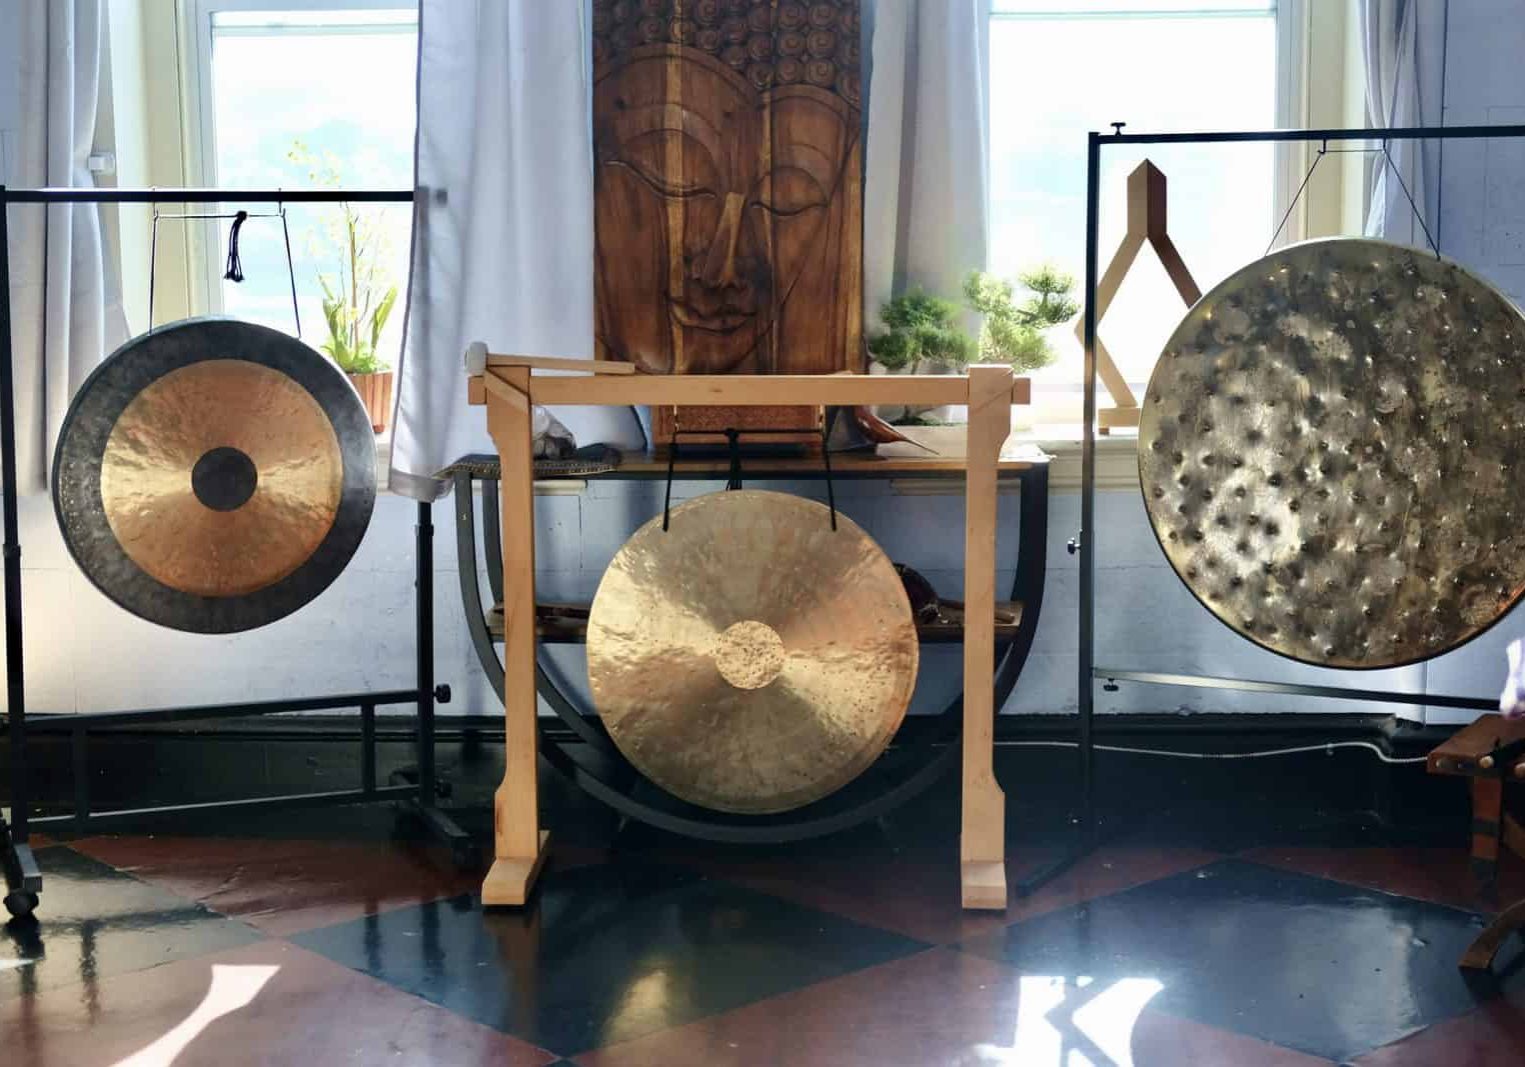 A variety of gongs